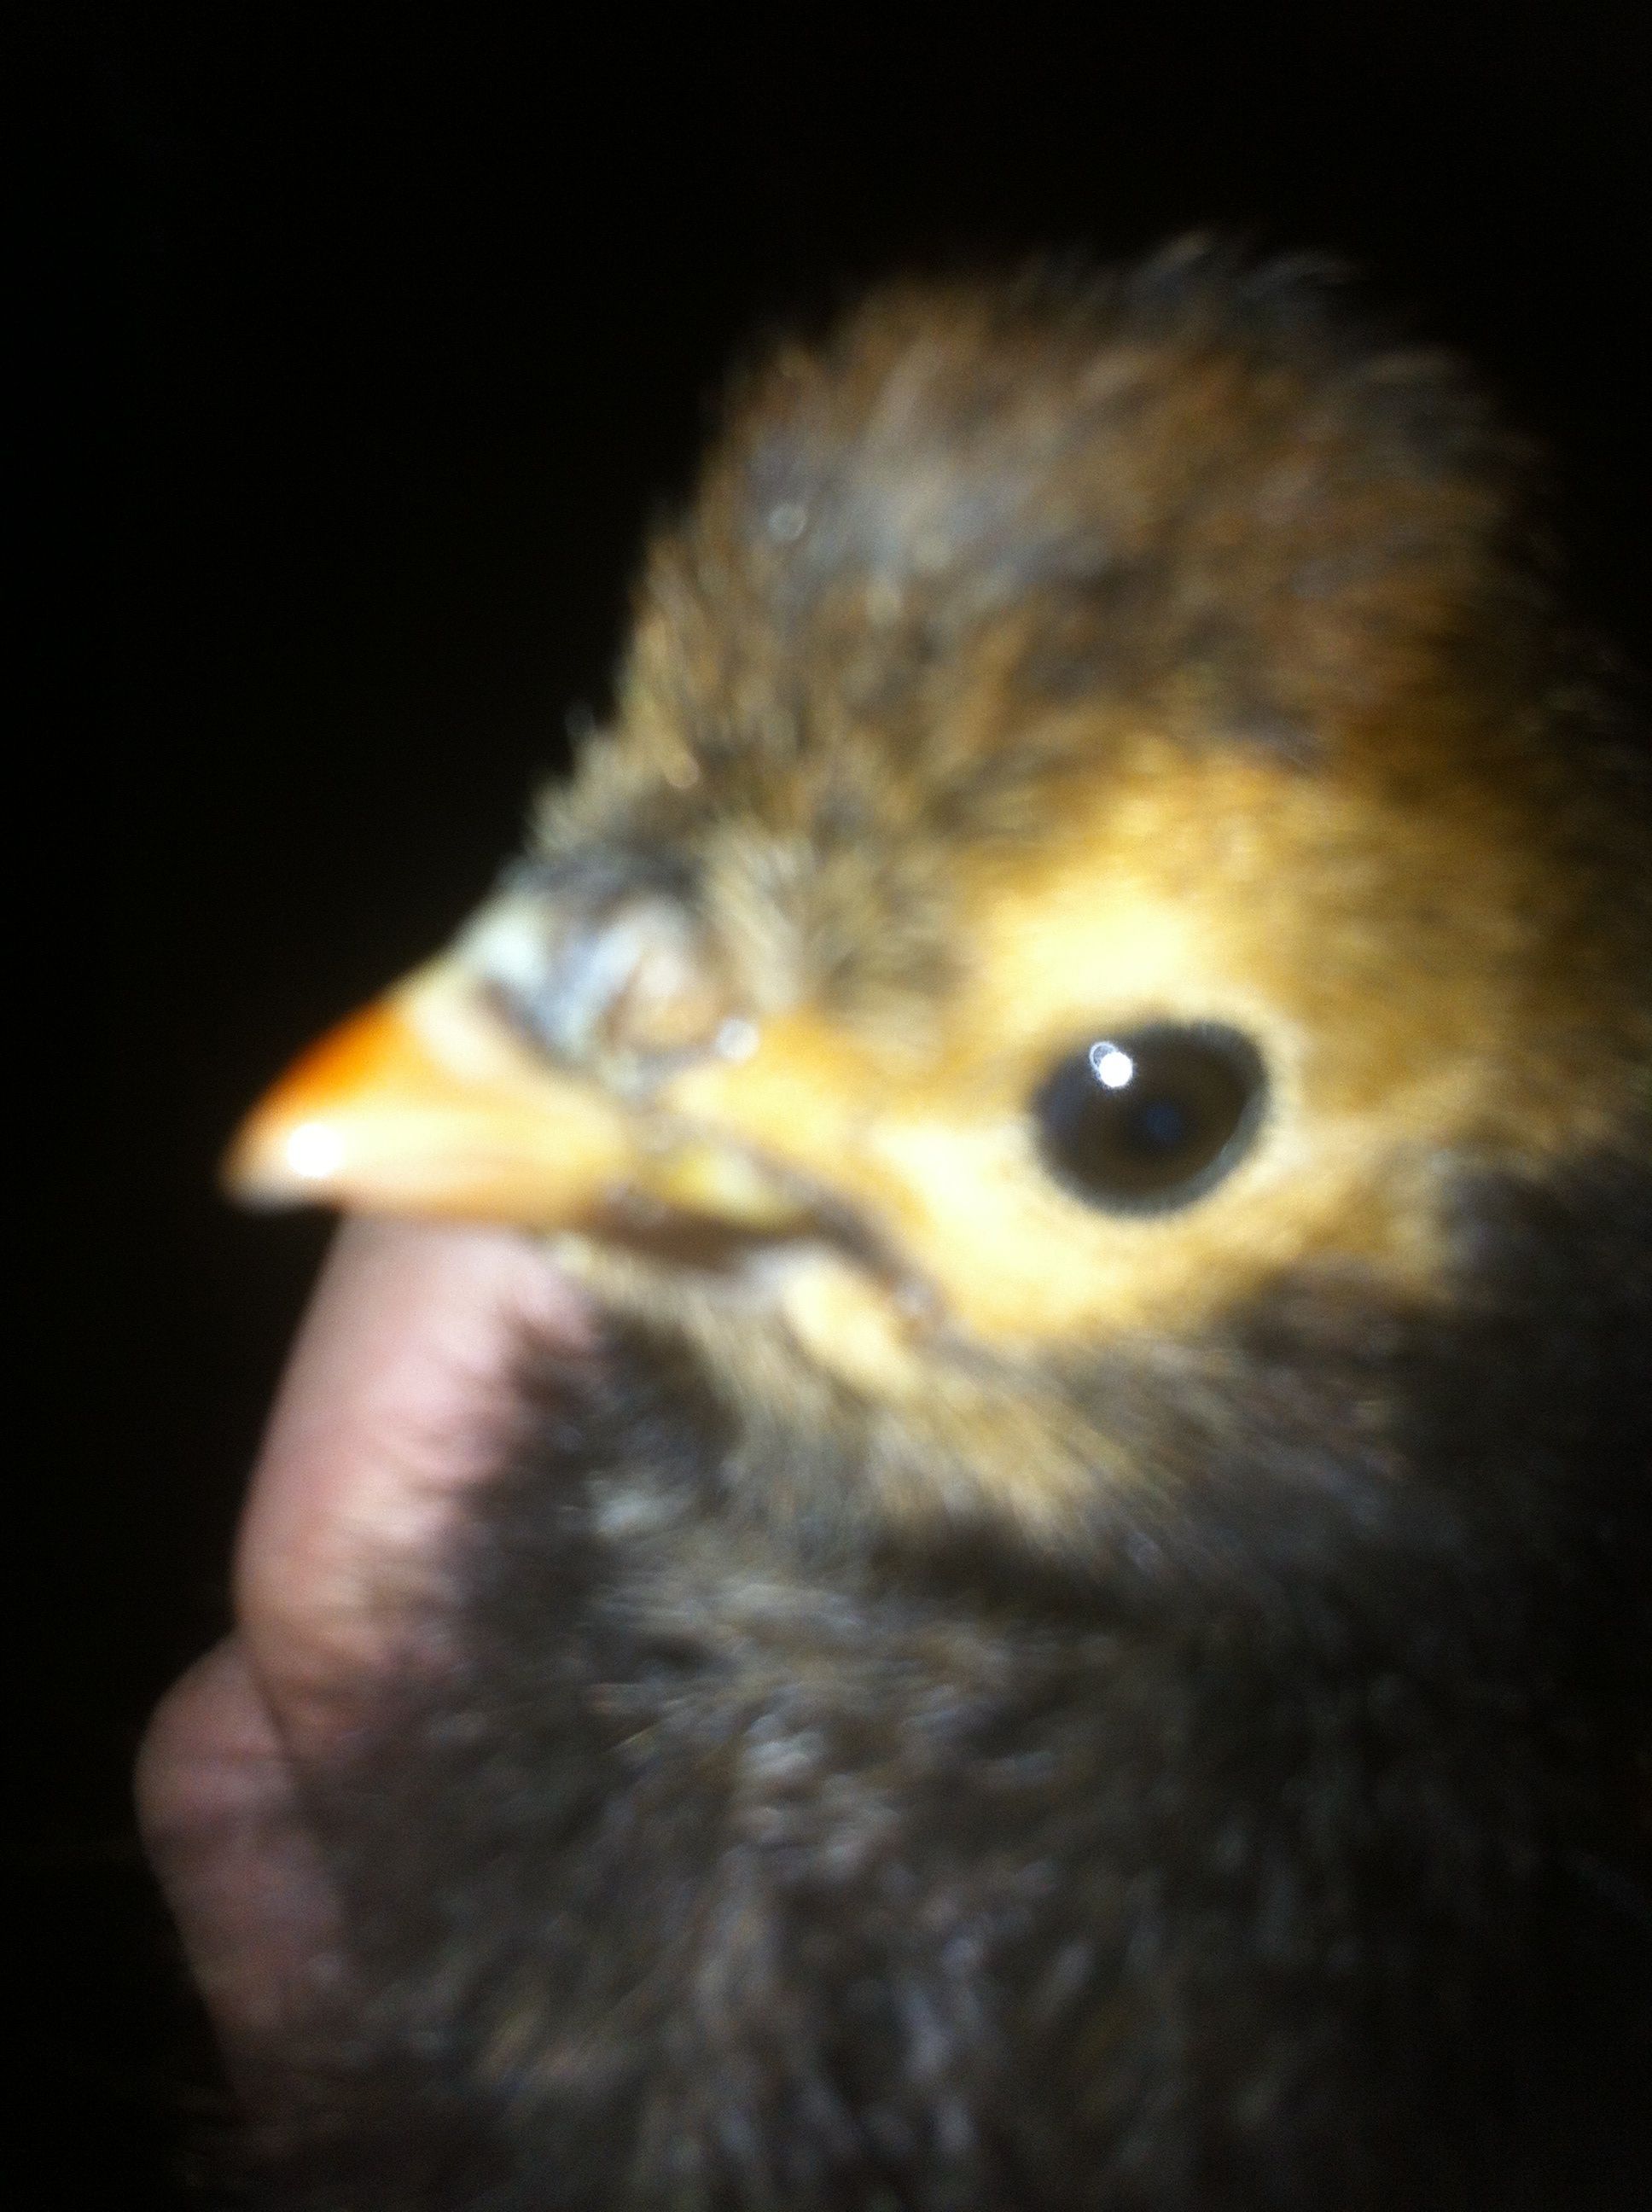 My little golden laced polish chick!
Houdini